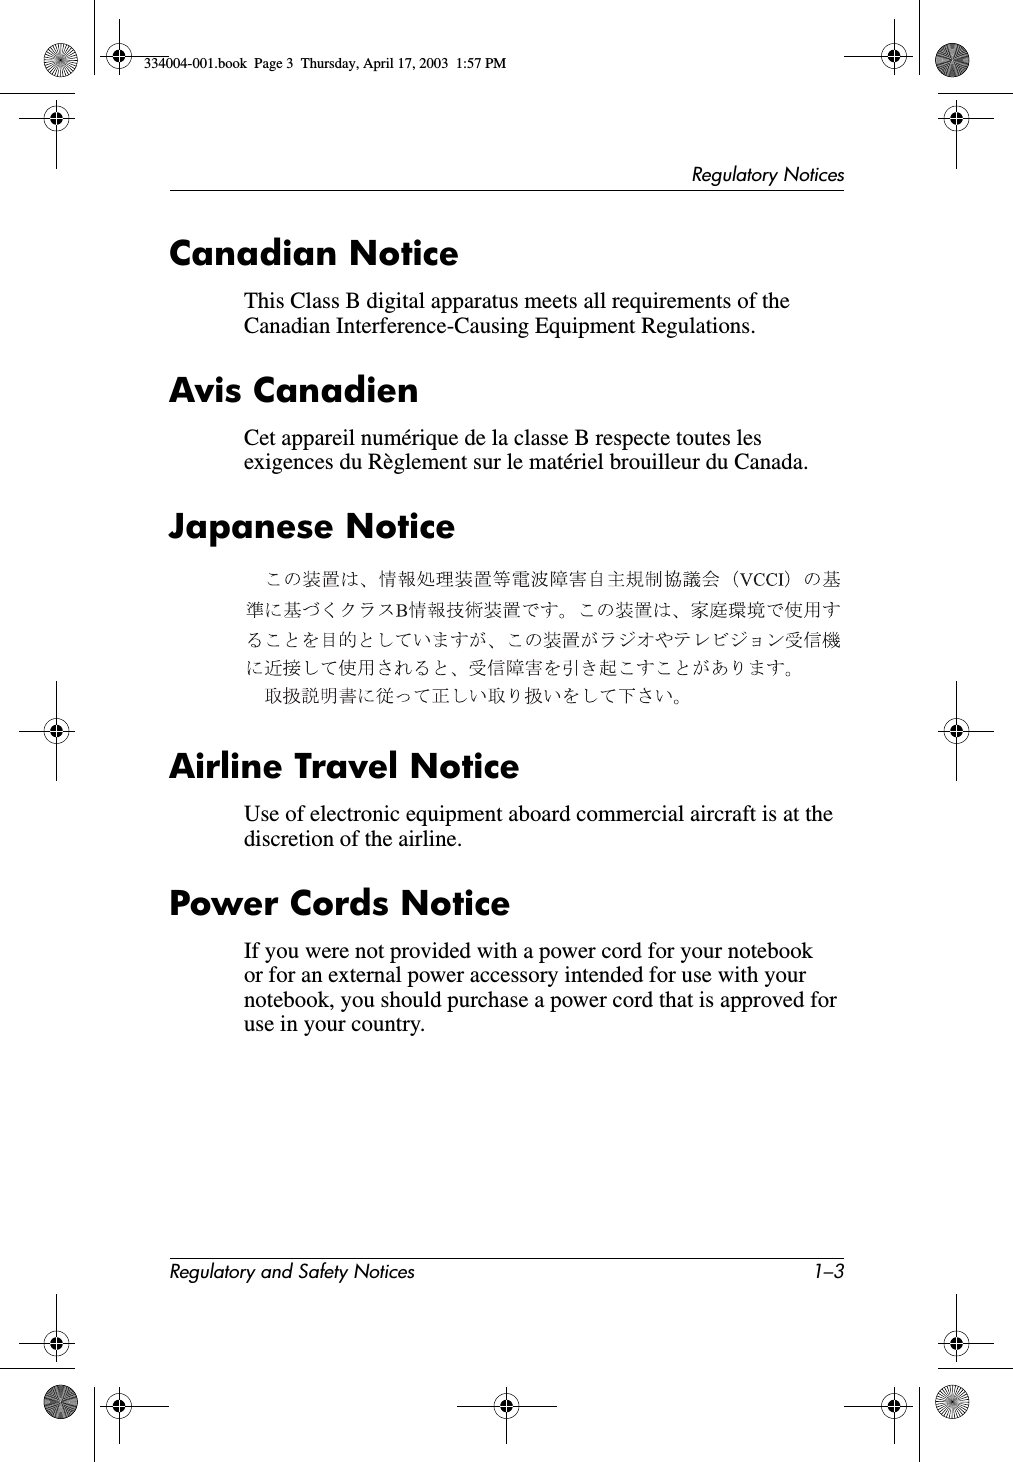 Regulatory NoticesRegulatory and Safety Notices 1–3Canadian NoticeThis Class B digital apparatus meets all requirements of the Canadian Interference-Causing Equipment Regulations.Avis CanadienCet appareil numérique de la classe B respecte toutes les exigences du Règlement sur le matériel brouilleur du Canada.Japanese NoticeAirline Travel NoticeUse of electronic equipment aboard commercial aircraft is at the discretion of the airline.Power Cords NoticeIf you were not provided with a power cord for your notebook or for an external power accessory intended for use with your notebook, you should purchase a power cord that is approved for use in your country.334004-001.book  Page 3  Thursday, April 17, 2003  1:57 PM